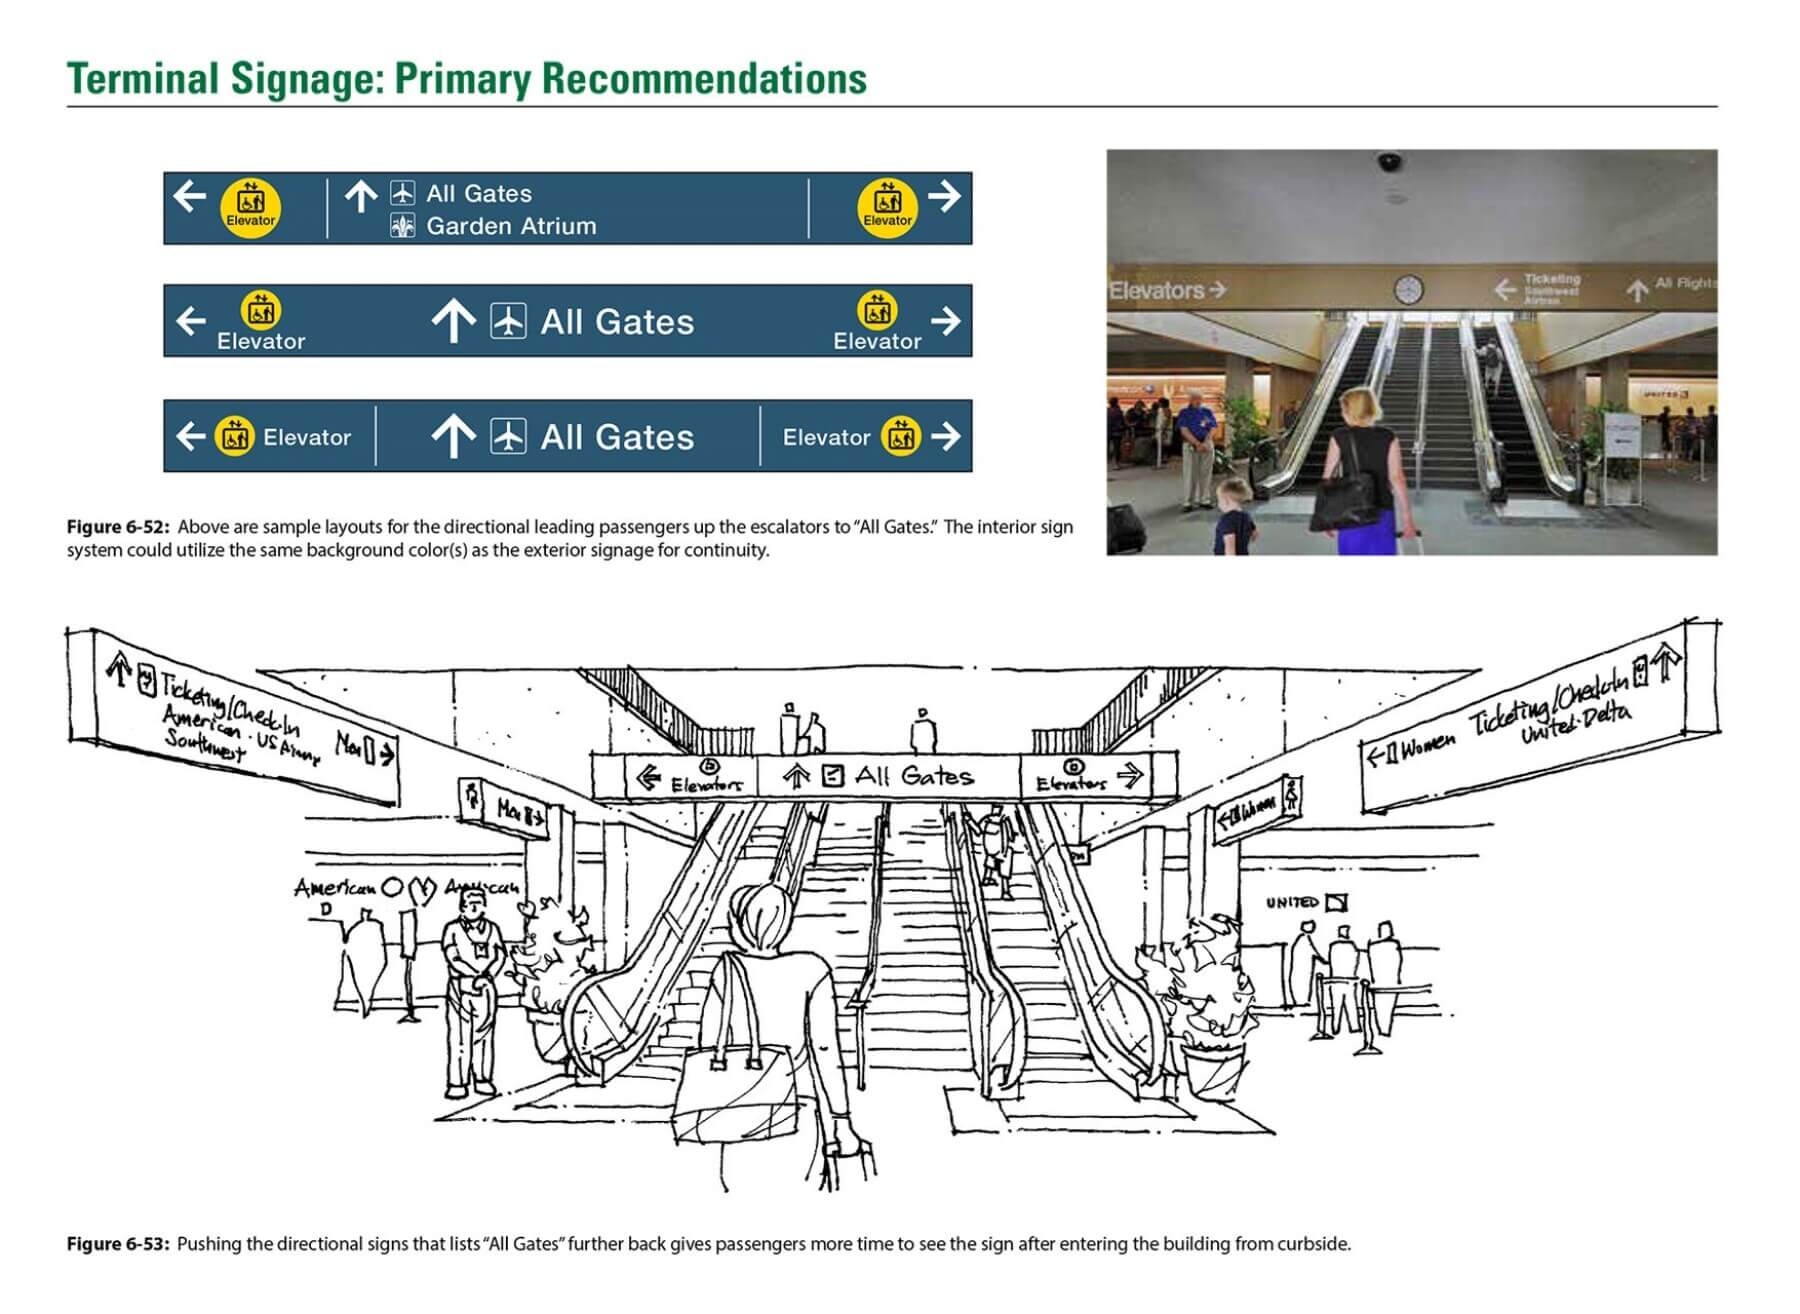 a page from the signage evaluation report for Norfolk International Airport with primary terminal signage recommendations